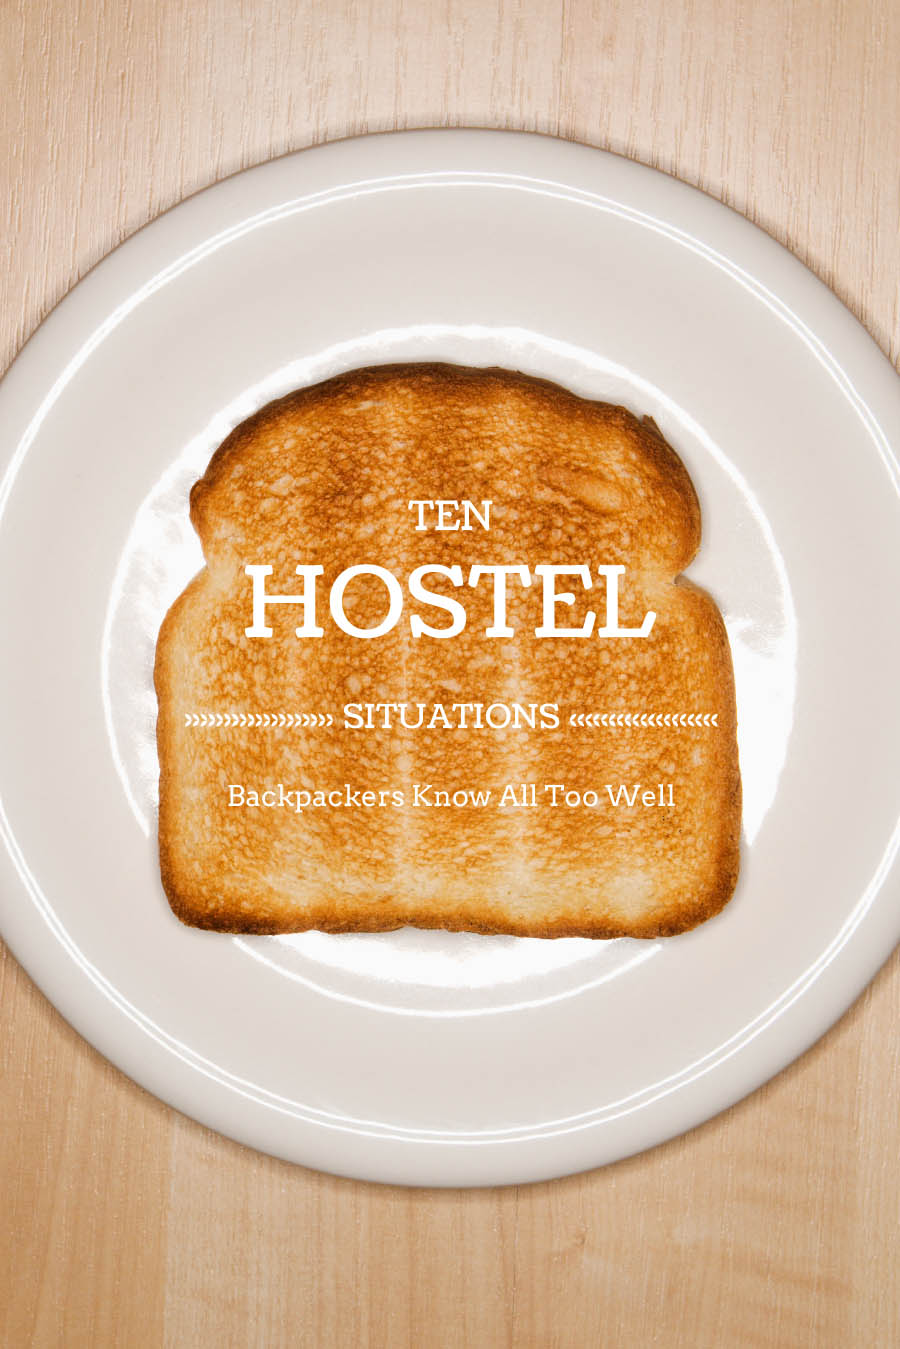 Ten Hostel Situations Backpackers Know All Too Well